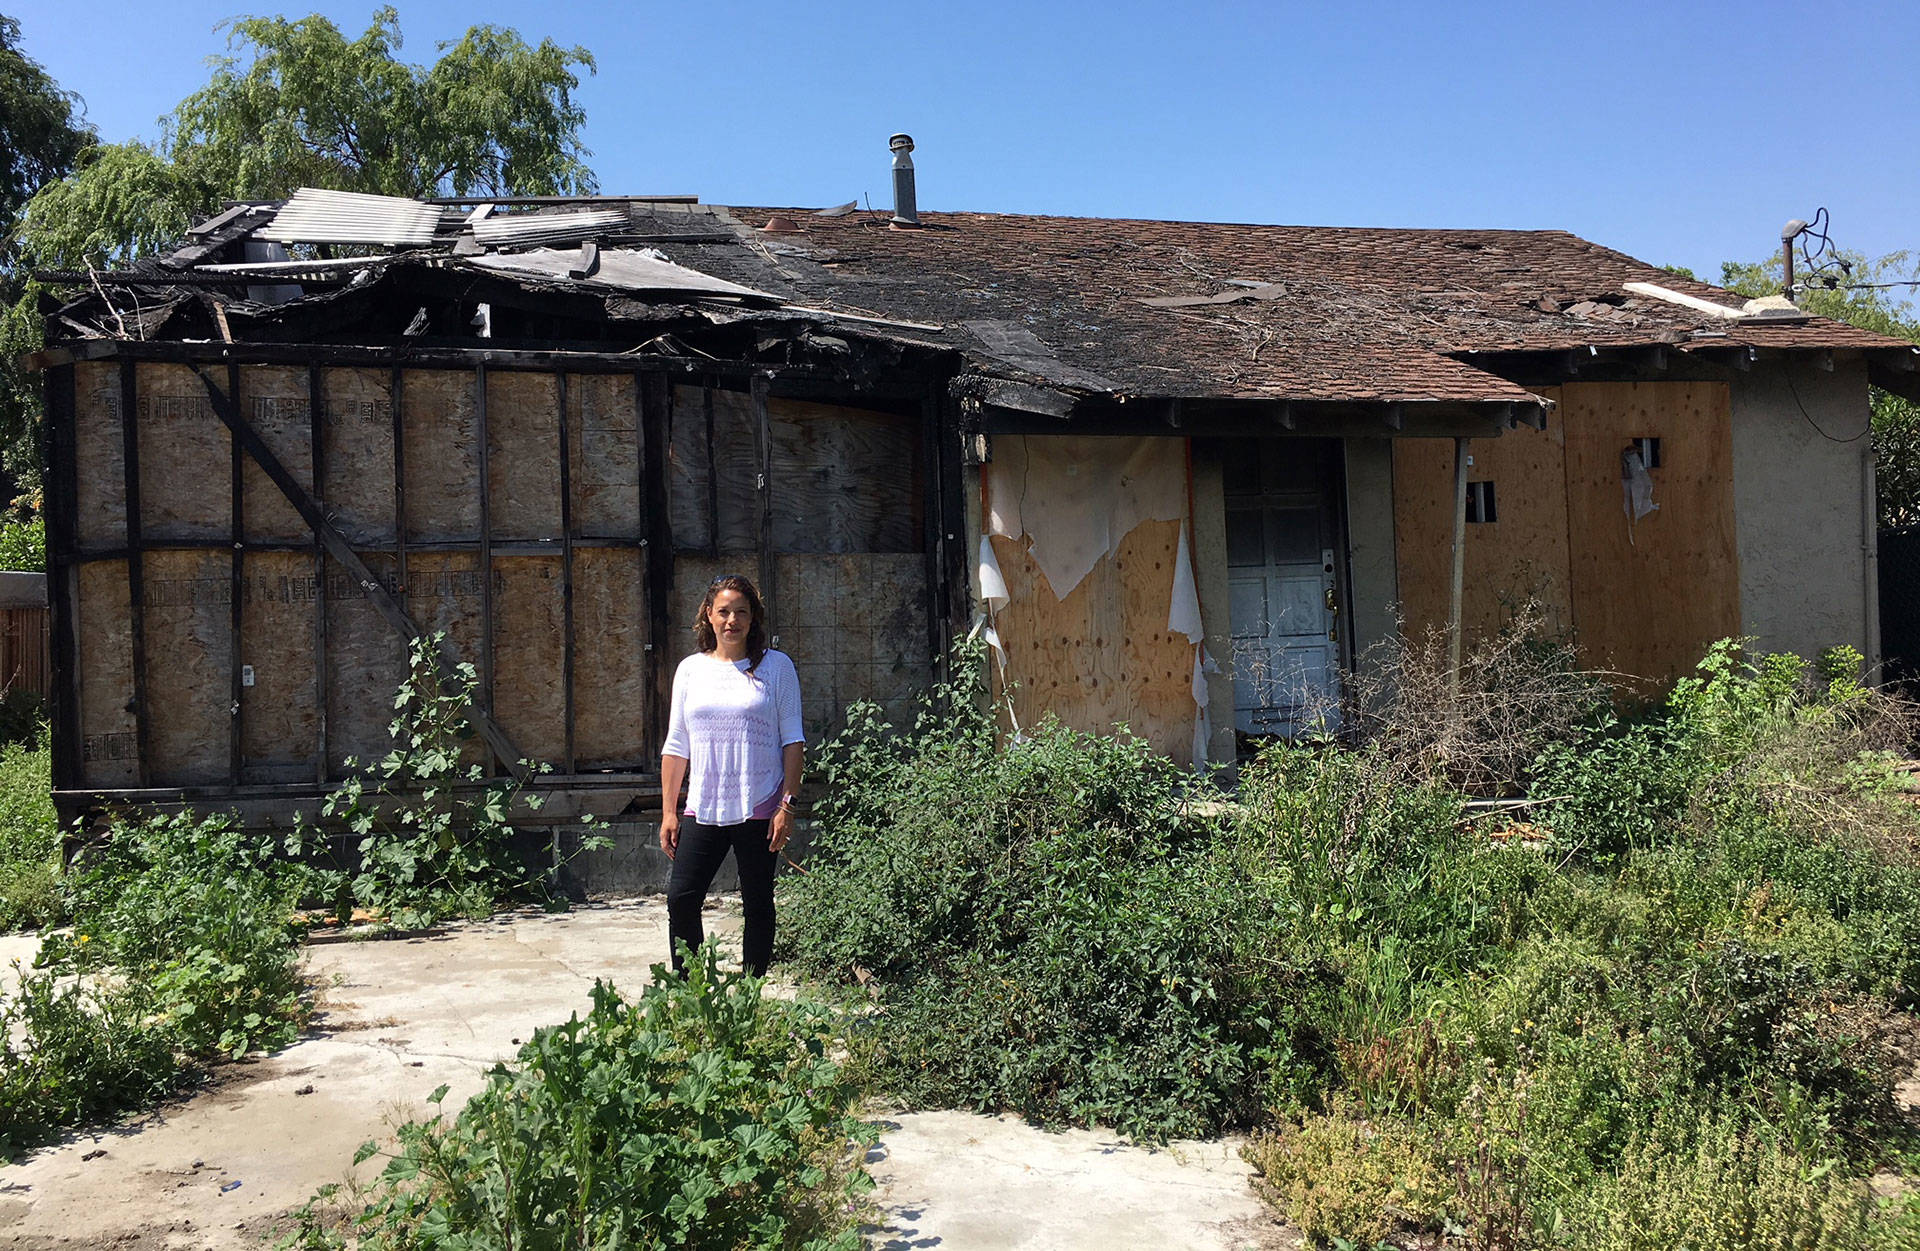 San Jose Realtor Holly Barr stands outside the burned-out house she sold for more than $900,000. Matt Levin/CALmatters